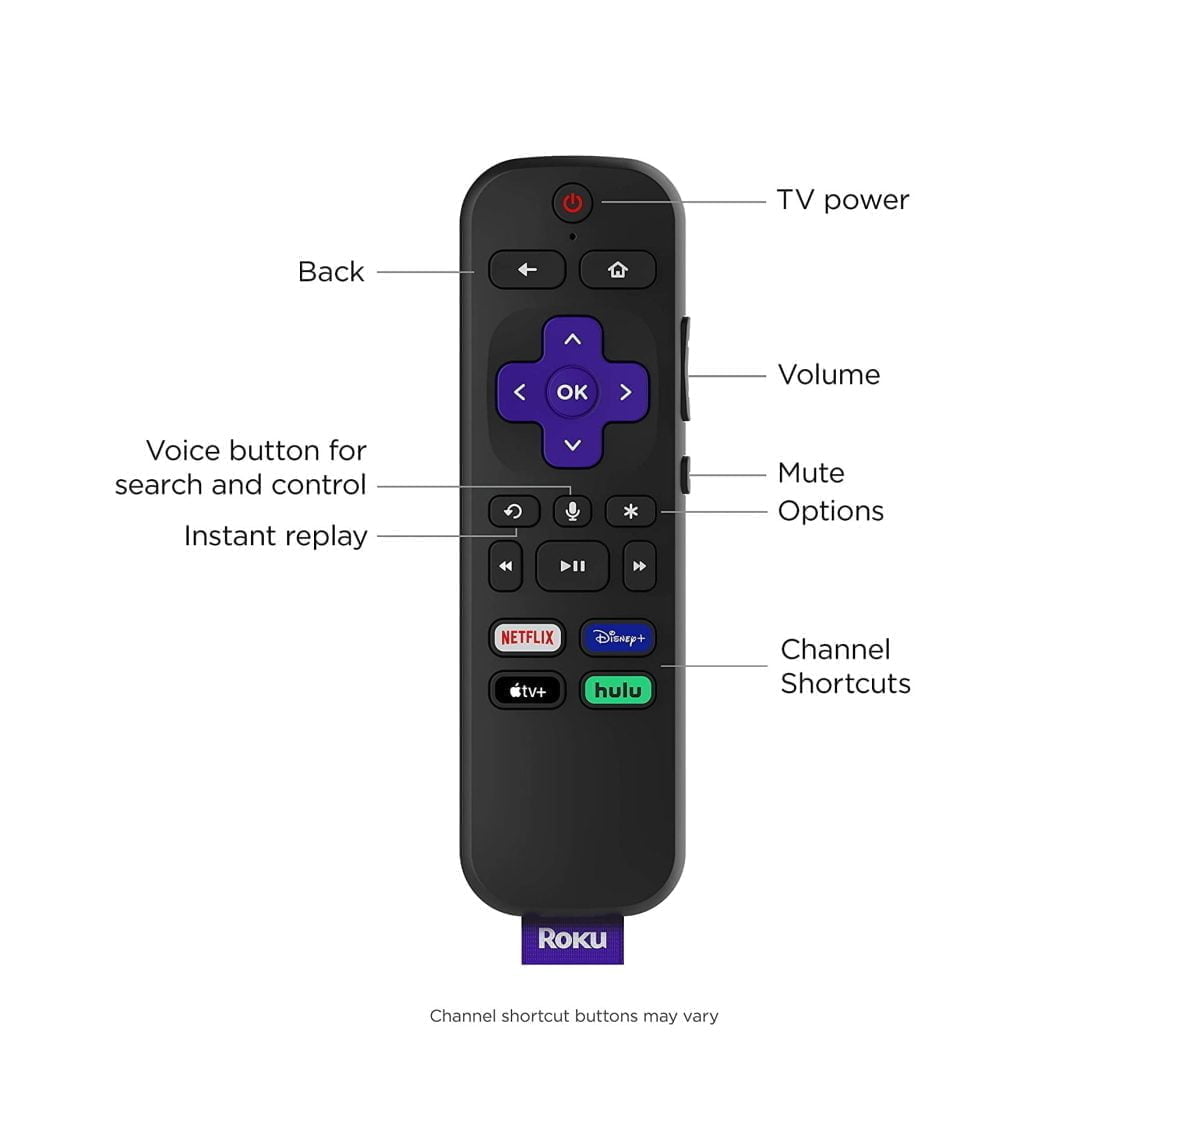 719Tx6Iixl. Ac Sl1500 1 Roku &Lt;H1&Gt;Roku Express 4K+ 2021 | Streaming Media Player Hd/4K/Hdr With Smooth Wireless Streaming And Roku Voice Remote With Tv Controls, Includes Premium Hdmi Cable&Lt;/H1&Gt; &Lt;Ul Class=&Quot;A-Unordered-List A-Vertical A-Spacing-Mini&Quot;&Gt; &Lt;Li&Gt;&Lt;Span Class=&Quot;A-List-Item&Quot;&Gt;Brilliant 4K Picture Quality: Stream In Hd, 4K, And Hdr With Sharp Resolution And Vivid Color Optimized For Your Tv&Lt;/Span&Gt;&Lt;/Li&Gt; &Lt;Li&Gt;&Lt;Span Class=&Quot;A-List-Item&Quot;&Gt;Smooth Wireless Streaming: Now Featuring Dual-Band Wireless, Enjoy A Smooth Streaming Experience With Faster Wireless Performance, Even With Multiple Devices Connected To Your Network&Lt;/Span&Gt;&Lt;/Li&Gt; &Lt;Li&Gt;&Lt;Span Class=&Quot;A-List-Item&Quot;&Gt;No More Juggling Remotes: Power Up Your Tv, Adjust The Volume, Mute, And Control Your Roku Device All With One Remote&Lt;/Span&Gt;&Lt;/Li&Gt; &Lt;Li&Gt;&Lt;Span Class=&Quot;A-List-Item&Quot;&Gt;Convenient Voice Control: Use Your Voice To Quickly Search Across Channels, Turn Captions On, And More In A Touch&Lt;/Span&Gt;&Lt;/Li&Gt; &Lt;Li&Gt;&Lt;Span Class=&Quot;A-List-Item&Quot;&Gt;Upgrade To Roku Streaming: All Of Your Favorite Channels, Like Hbo Max, Netflix, Youtube Tv, And Prime Video, Are Front And Center On The Customizable Home Screen, Plus Your Device Is Always Getting Better With Automatic Updates&Lt;/Span&Gt;&Lt;/Li&Gt; &Lt;Li&Gt;&Lt;Span Class=&Quot;A-List-Item&Quot;&Gt;Simple Setup: It’s Easy To Get Started With Everything You Need Included In The Box, Including A Premium Hdmi Cable—Just Plug It In And Connect To The Internet&Lt;/Span&Gt;&Lt;/Li&Gt; &Lt;Li&Gt;&Lt;Span Class=&Quot;A-List-Item&Quot;&Gt;Save Money, Stream Big: Watch What You Love, Including A Massive Selection Of Free And Live Tv, Including 150+ Live Tv Channels Free On The Roku Channel—It’s Great For Streaming Tv And Cutting Cable&Lt;/Span&Gt;&Lt;/Li&Gt; &Lt;/Ul&Gt; &Lt;Div Class=&Quot;A-Row A-Expander-Container A-Expander-Inline-Container&Quot; Aria-Live=&Quot;Polite&Quot;&Gt; &Lt;Div Class=&Quot;A-Expander-Content A-Expander-Extend-Content A-Expander-Content-Expanded&Quot; Aria-Expanded=&Quot;True&Quot;&Gt; &Lt;Ul Class=&Quot;A-Unordered-List A-Vertical A-Spacing-None&Quot;&Gt; &Lt;Li&Gt;&Lt;Span Class=&Quot;A-List-Item&Quot;&Gt;Works With Popular Voice Assistants: Enjoy Easy Voice Control With Siri, Alexa, Or Hey Google&Lt;/Span&Gt;&Lt;/Li&Gt; &Lt;Li&Gt;&Lt;Span Class=&Quot;A-List-Item&Quot;&Gt;Share It With Apple Airplay: Effortlessly Share Videos, Photos, Music, And More From Your Apple Devices To Your Tv.&Lt;/Span&Gt;&Lt;/Li&Gt; &Lt;/Ul&Gt; &Lt;/Div&Gt; &Lt;/Div&Gt; Roku Express 4K+ 2021 | Streaming Media Player Hd/4K/Hdr With Smooth Wireless Streaming And Roku Voice Remote With Tv Controls, Includes Premium Hdmi Cable